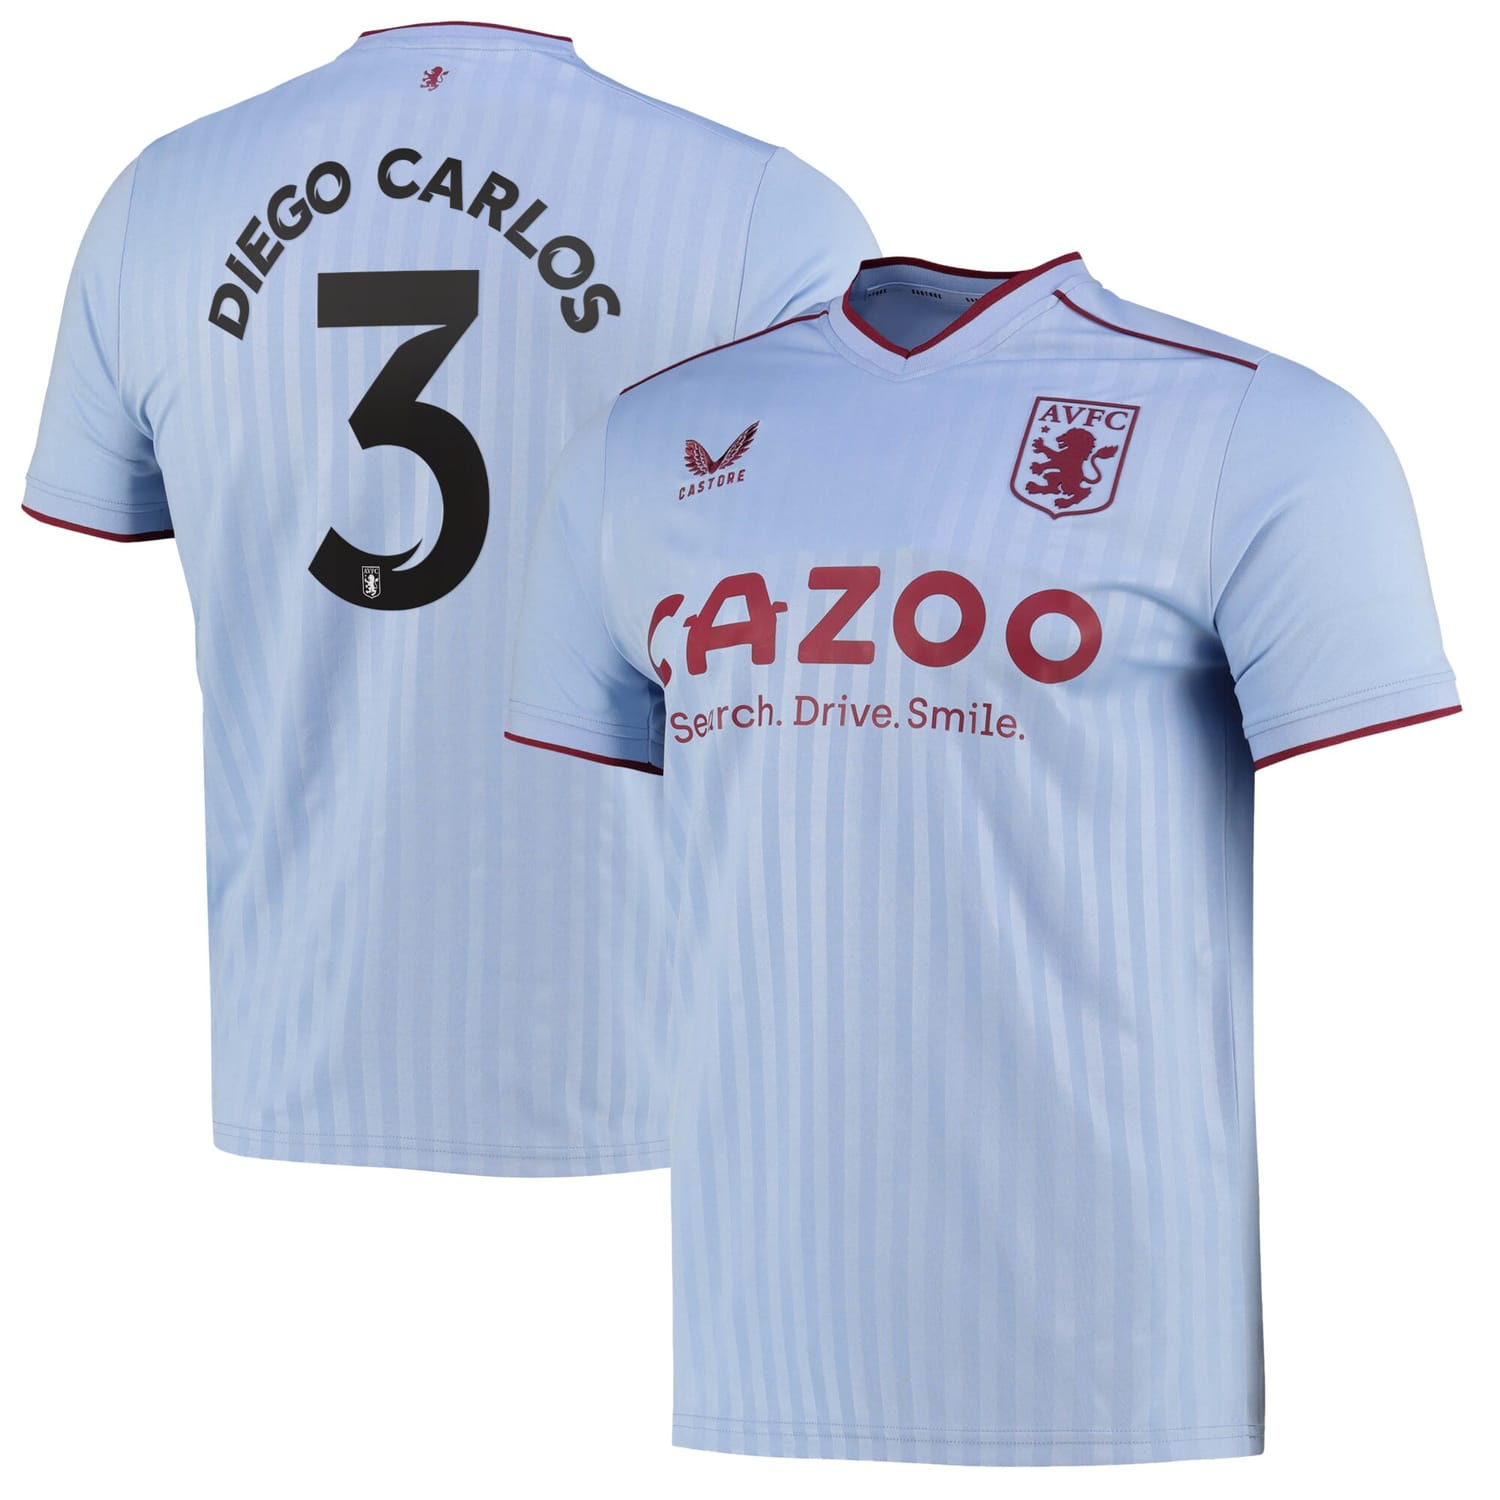 Premier League Aston Villa Away Cup Jersey Shirt 2022-23 player Diego Carlos 3 printing for Men